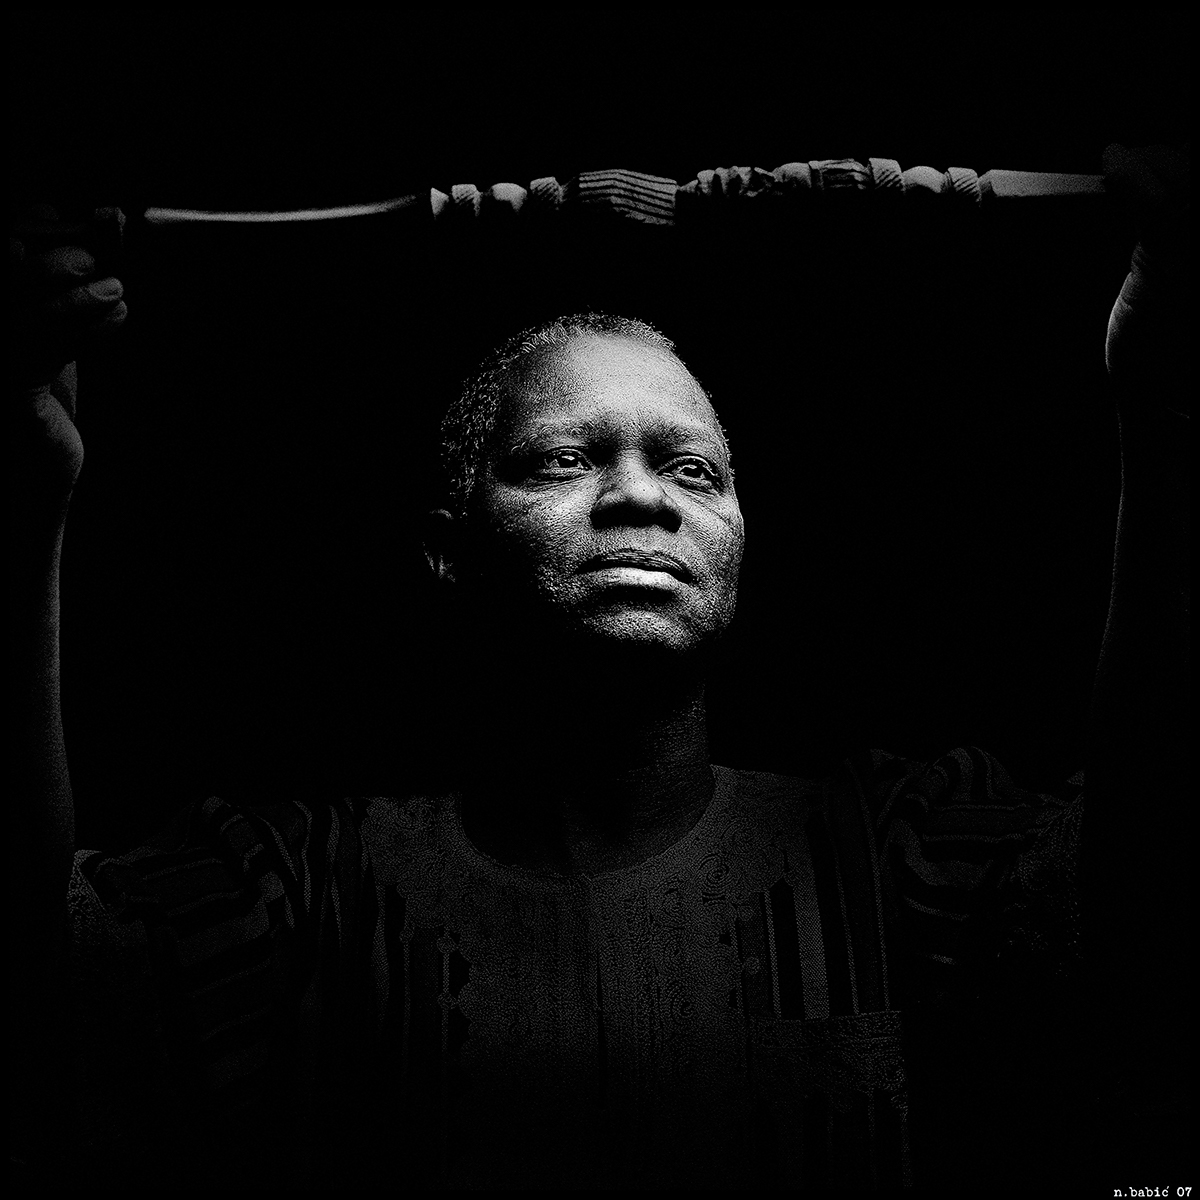 Exhibition  african museum belgrade photo nebojsa babic black and white africans in belgrade contrast beauty Serbia texture sharpness